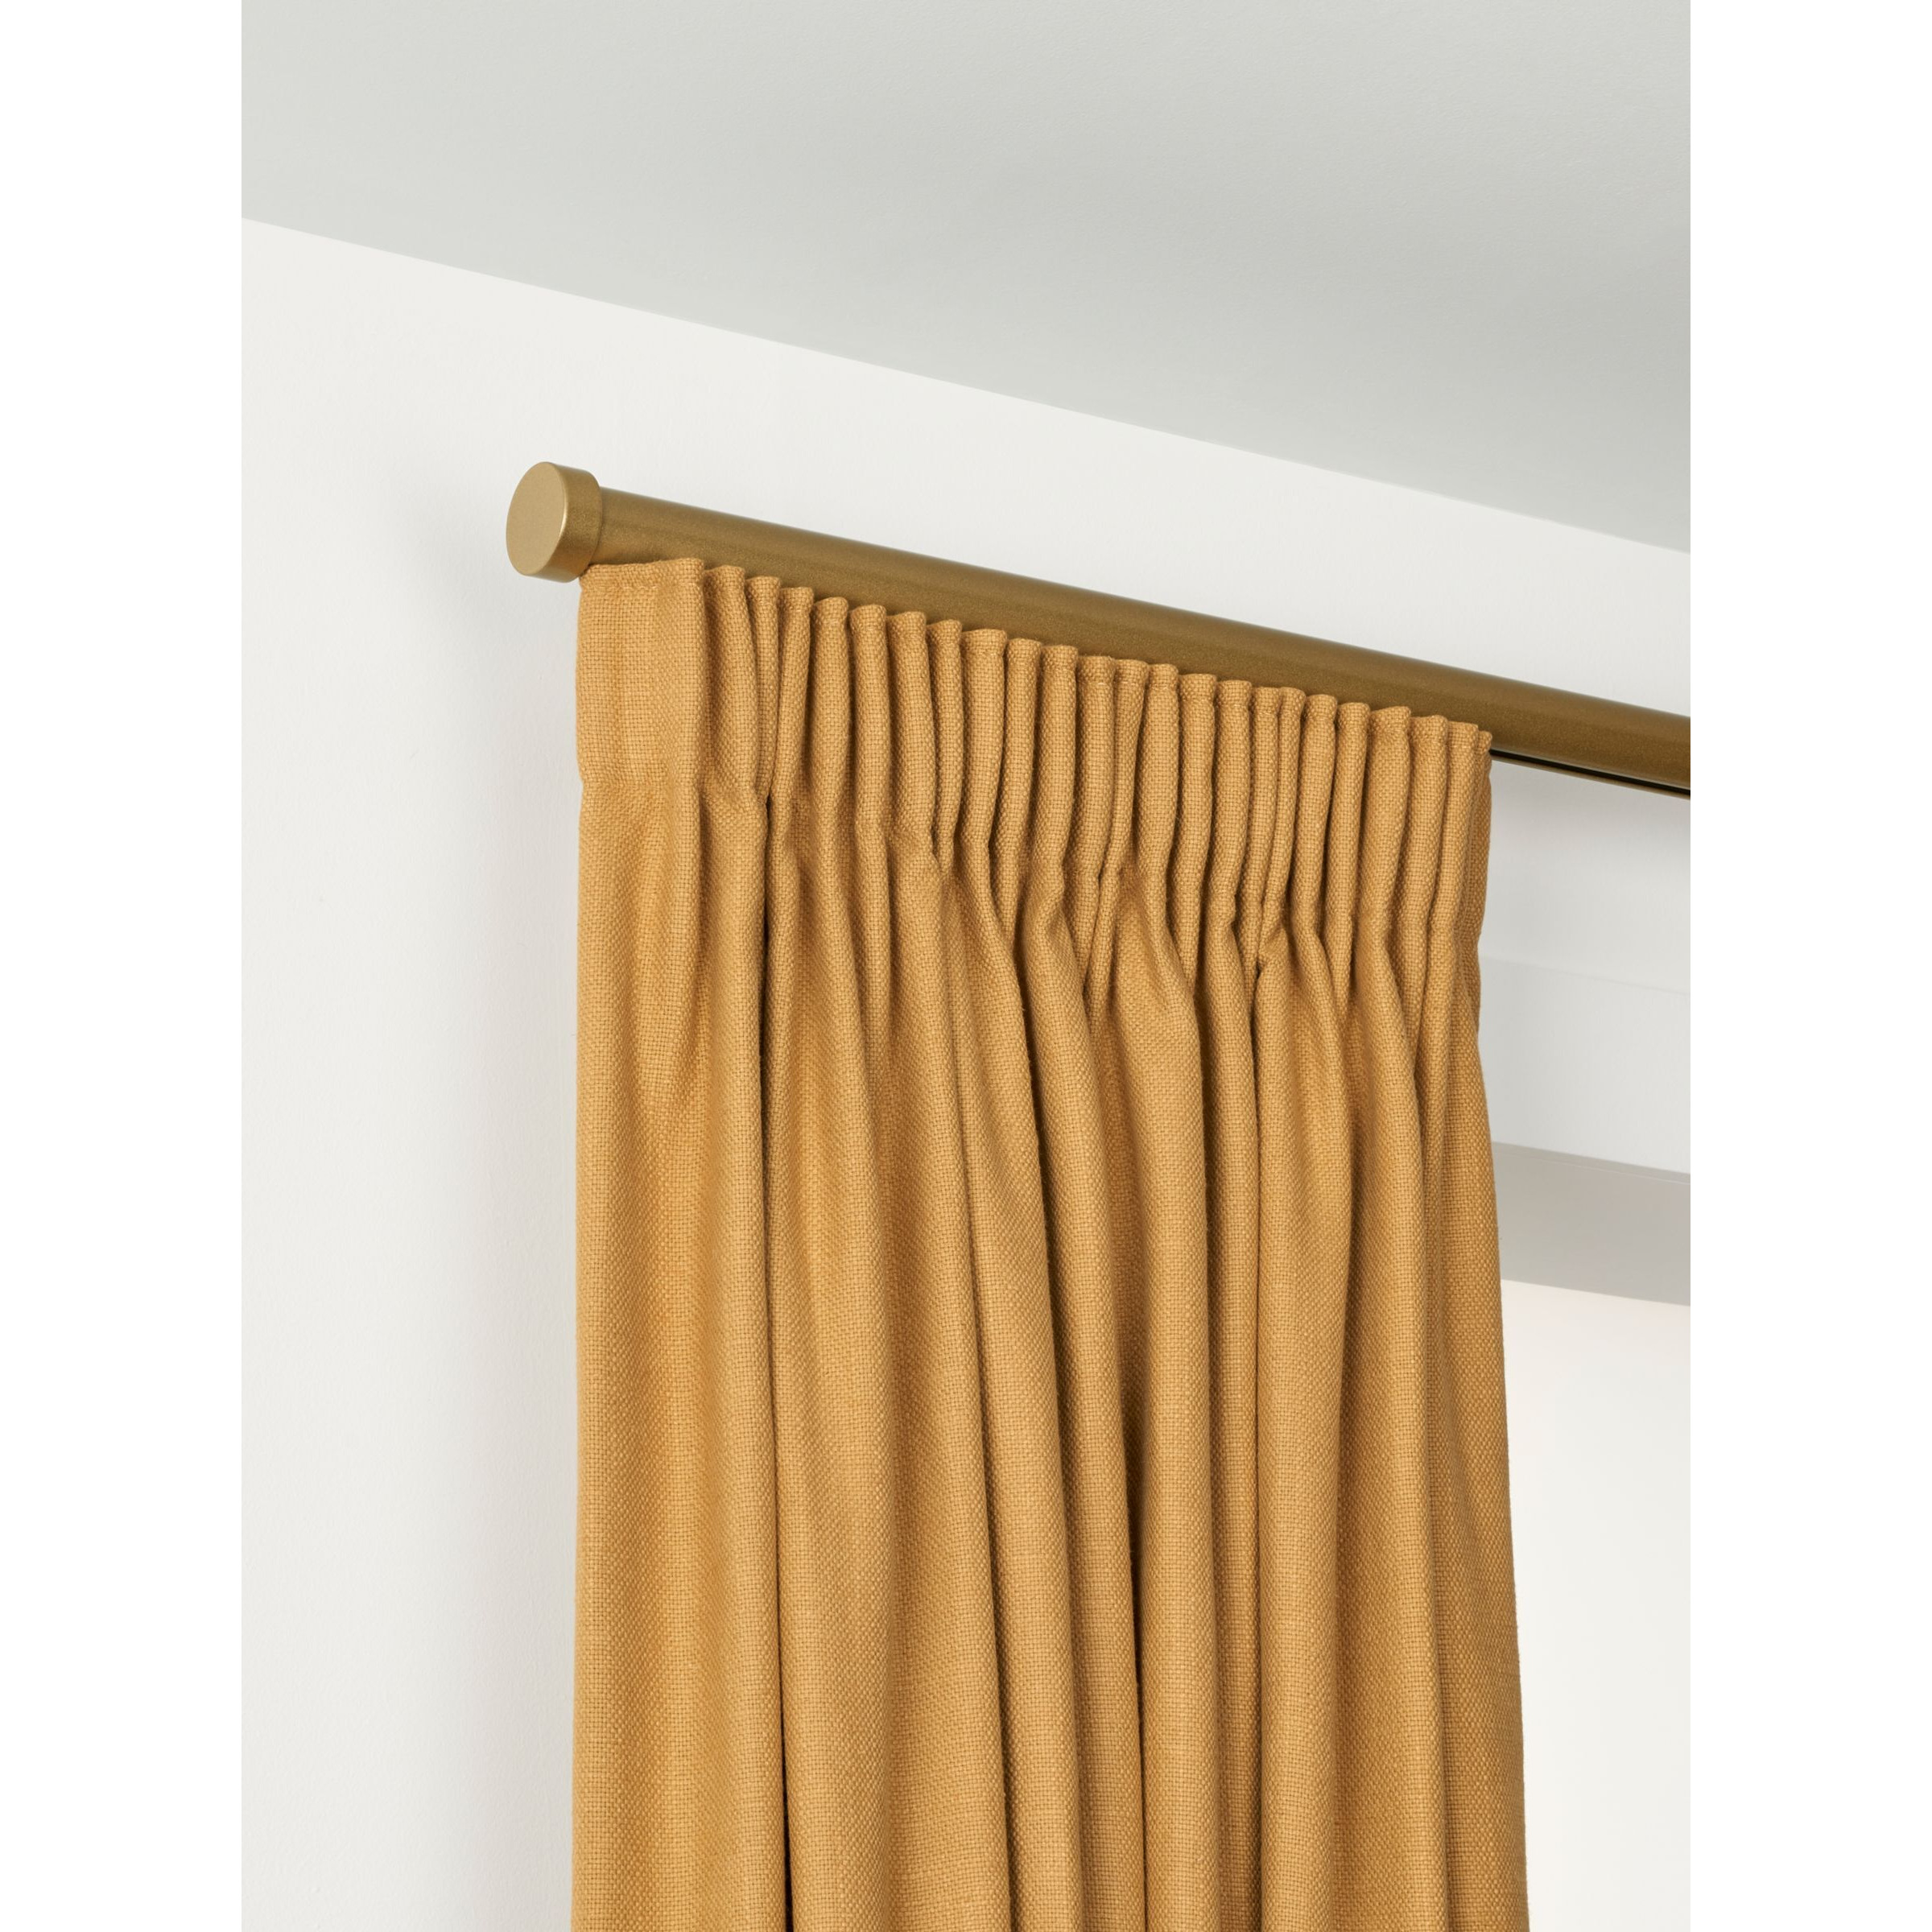 John Lewis Select Gliding Curtain Pole with Stud Finial, Wall Fix, Dia.30mm - image 1